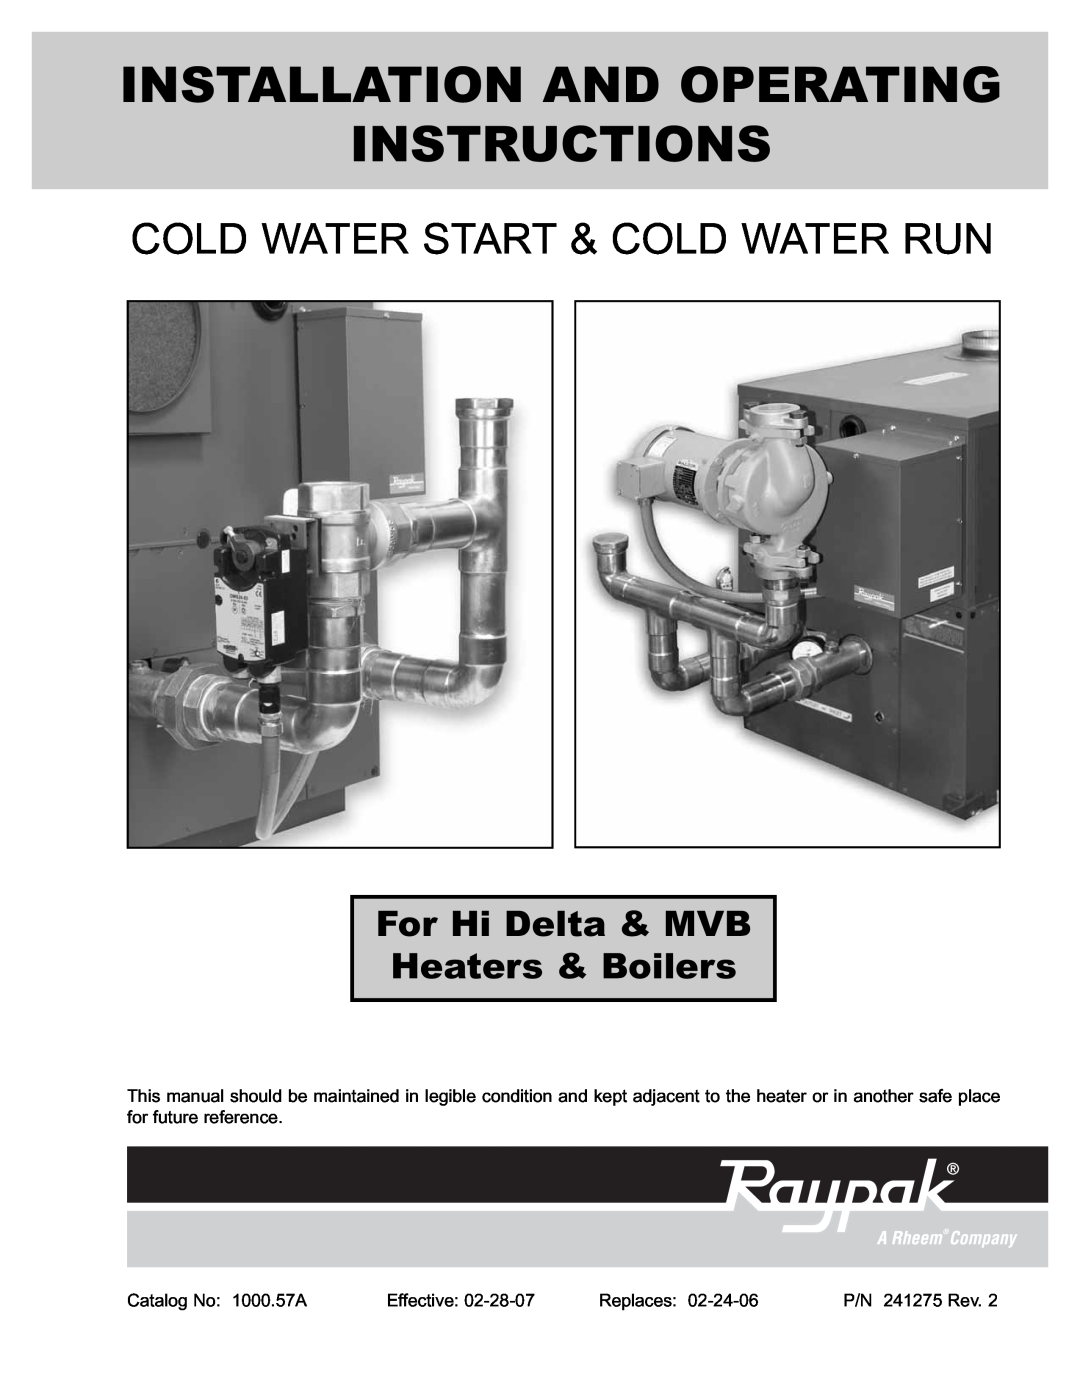 Raypak 241275 manual Installation And Operating Instructions, Cold Water Start & Cold Water Run 